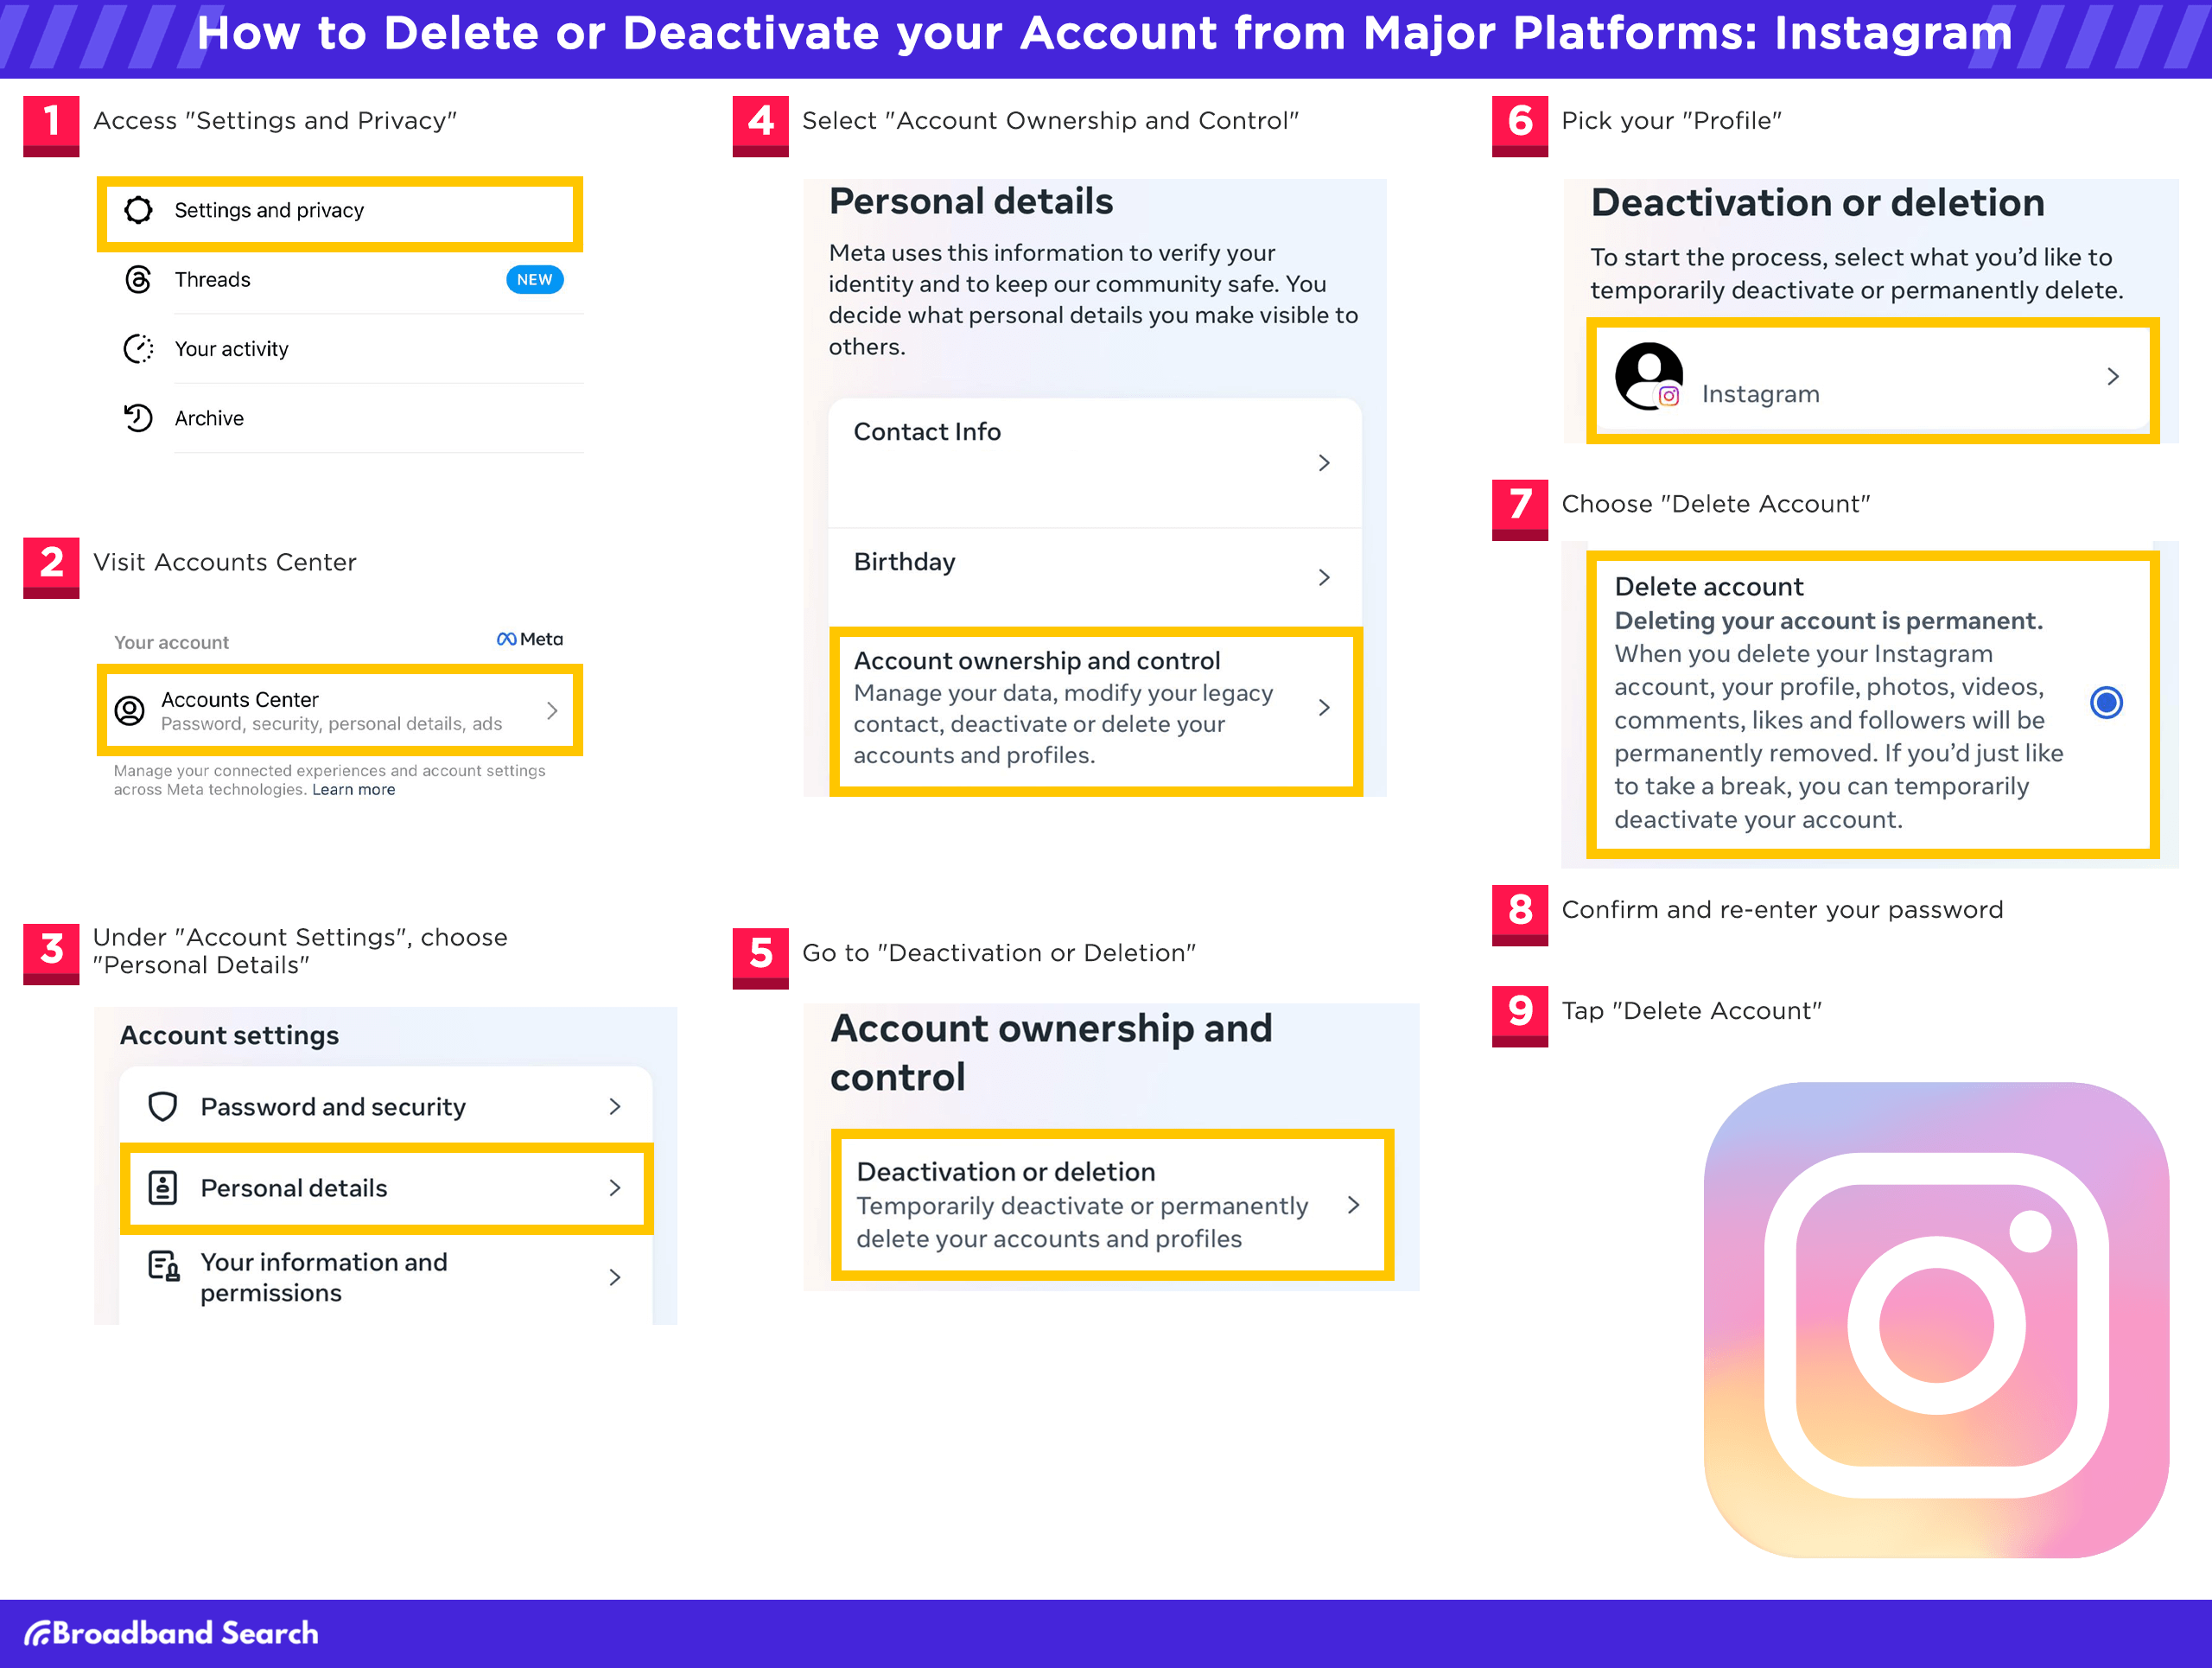 Steps on how to delete or deactivate your account from major platforms like Instagram